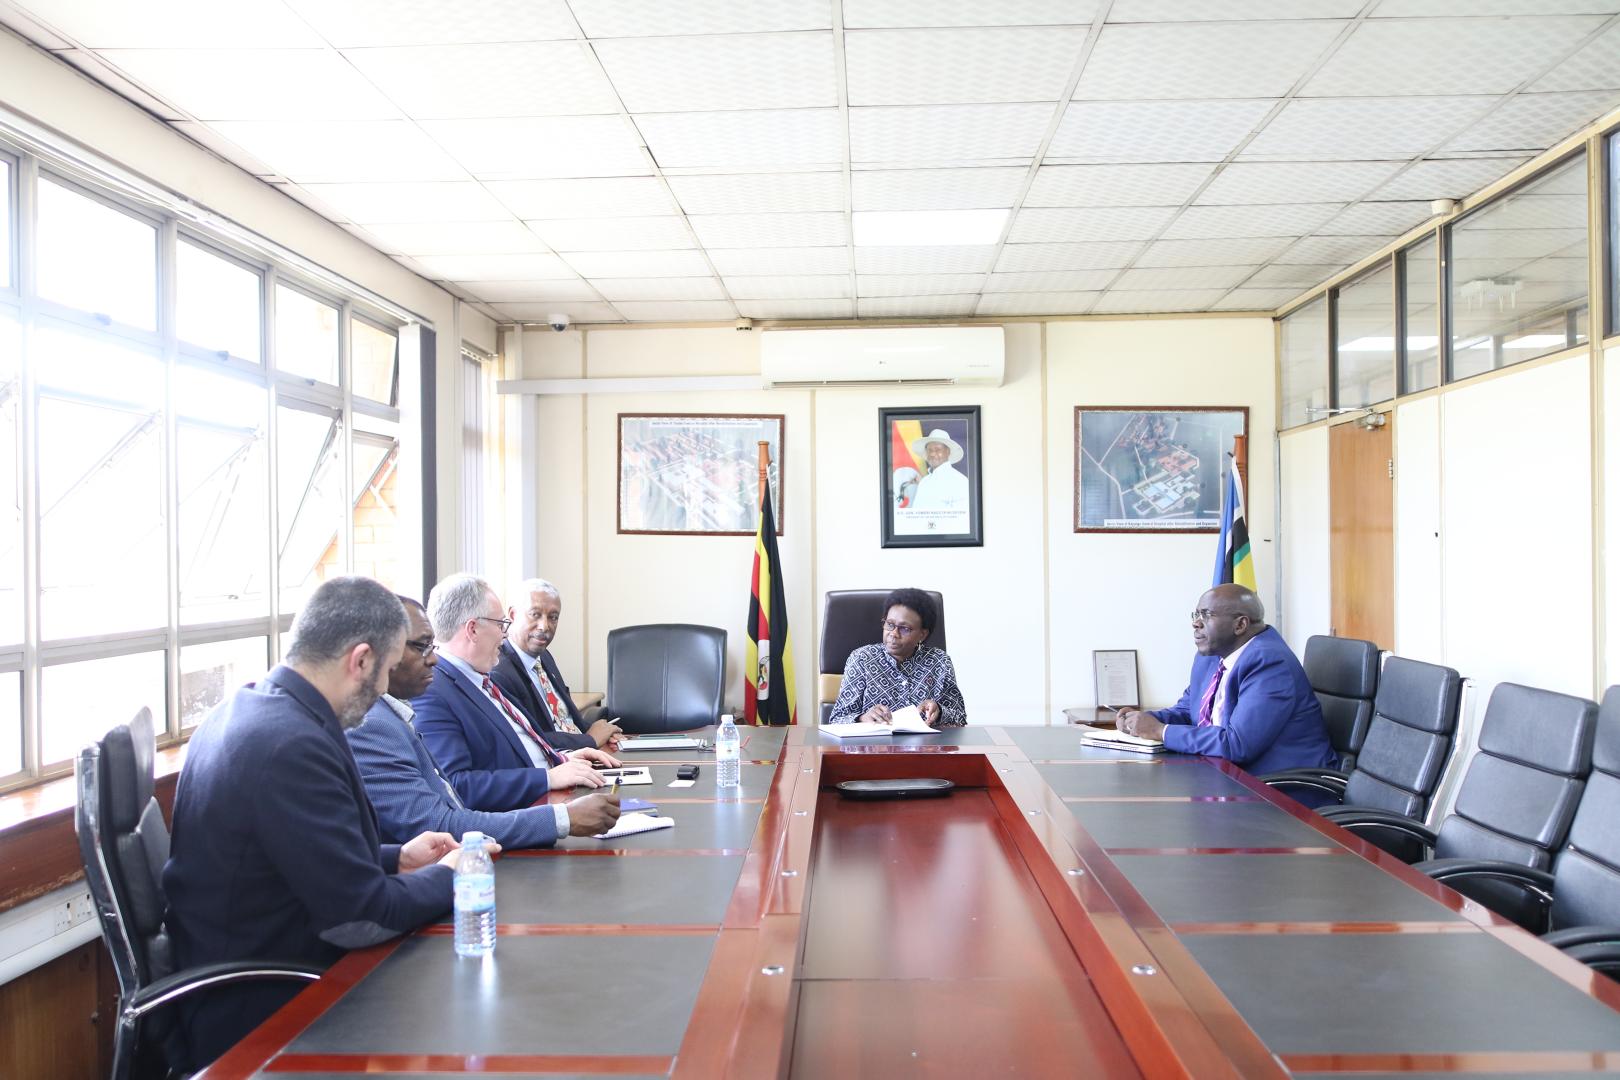 From right to left, meeting between Dr Andrew Bakainaga, WHO Lead - District Health Management Uganda, the Minister of Health, Dr. Jane Ruth Aceng Ocero; Dr Yonas Tegegn Woldemariam - WHO Representative to Uganda; Dr. Santino Severoni, Director of the Department of Health, and Migration at the WHO headquarters.